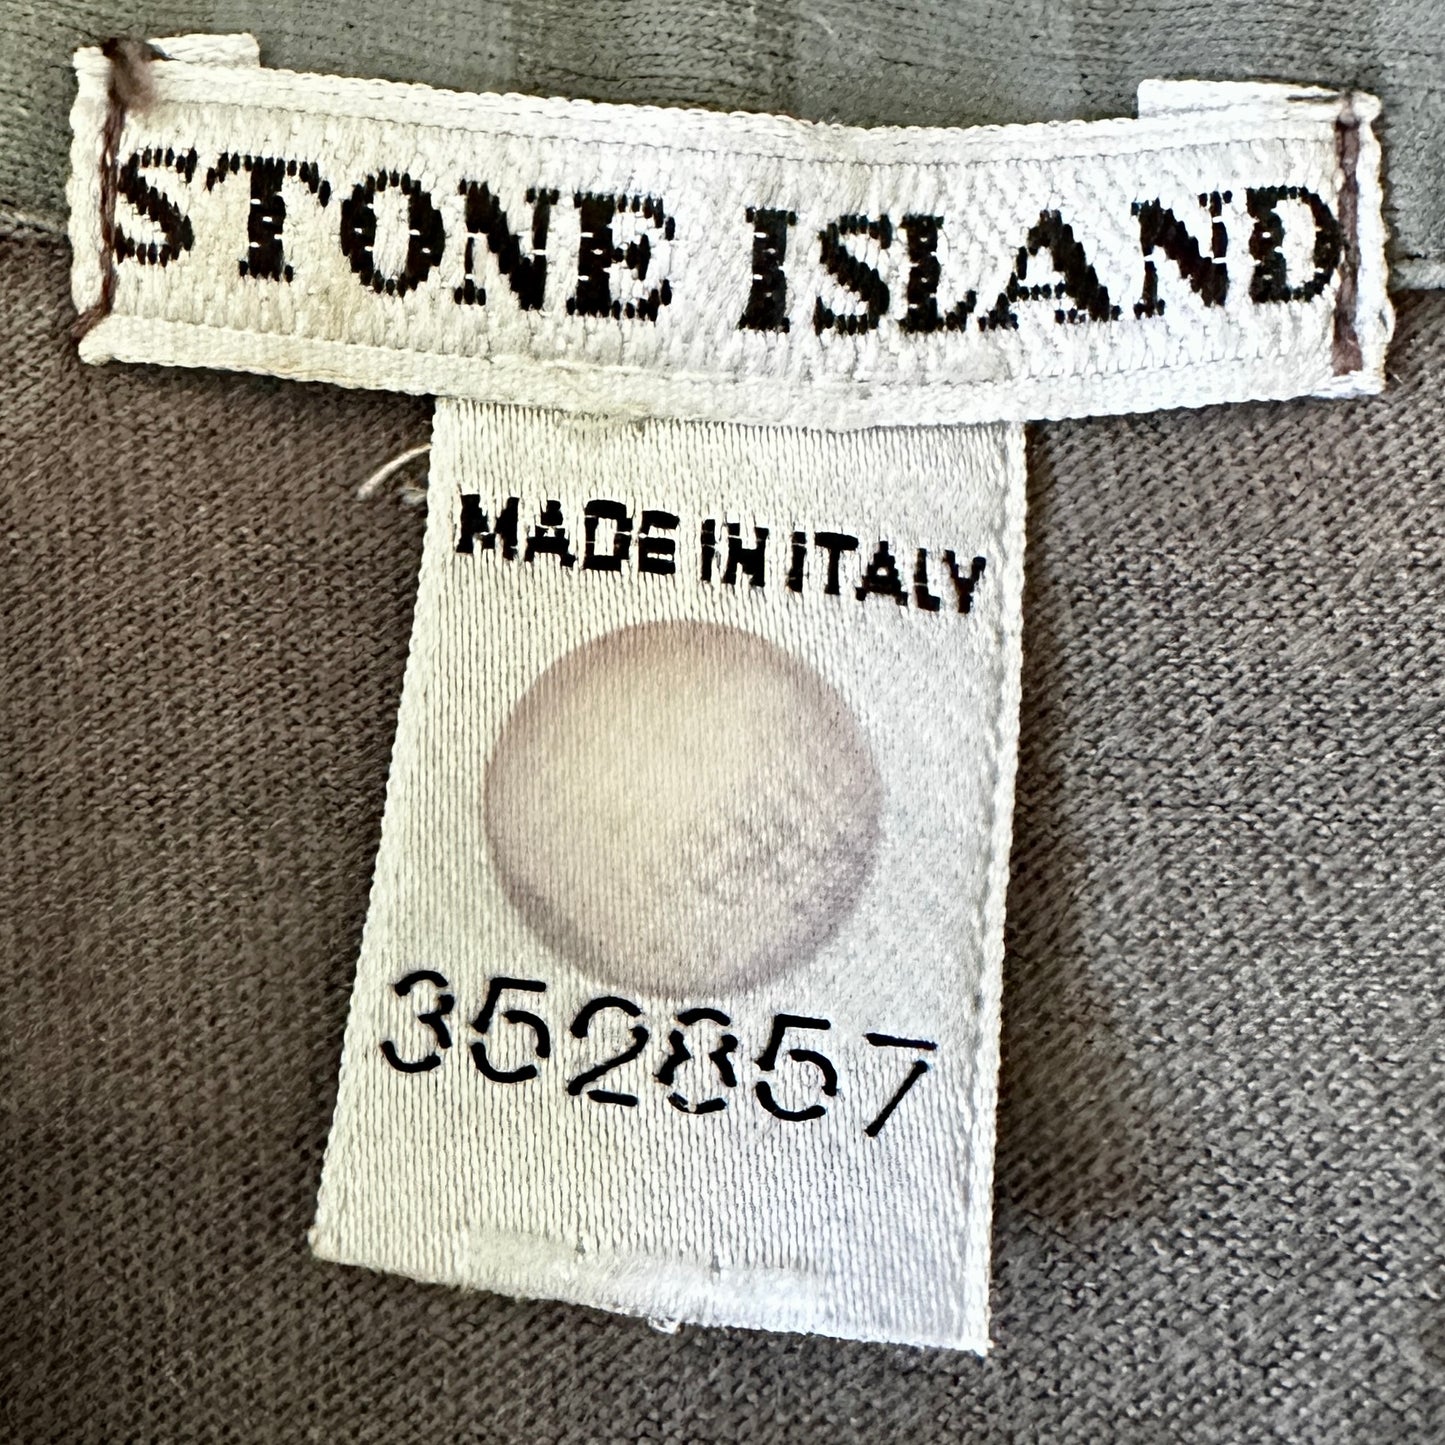 Stone Island Vintage 2002 Polo Shirt - XL - Made in Italy